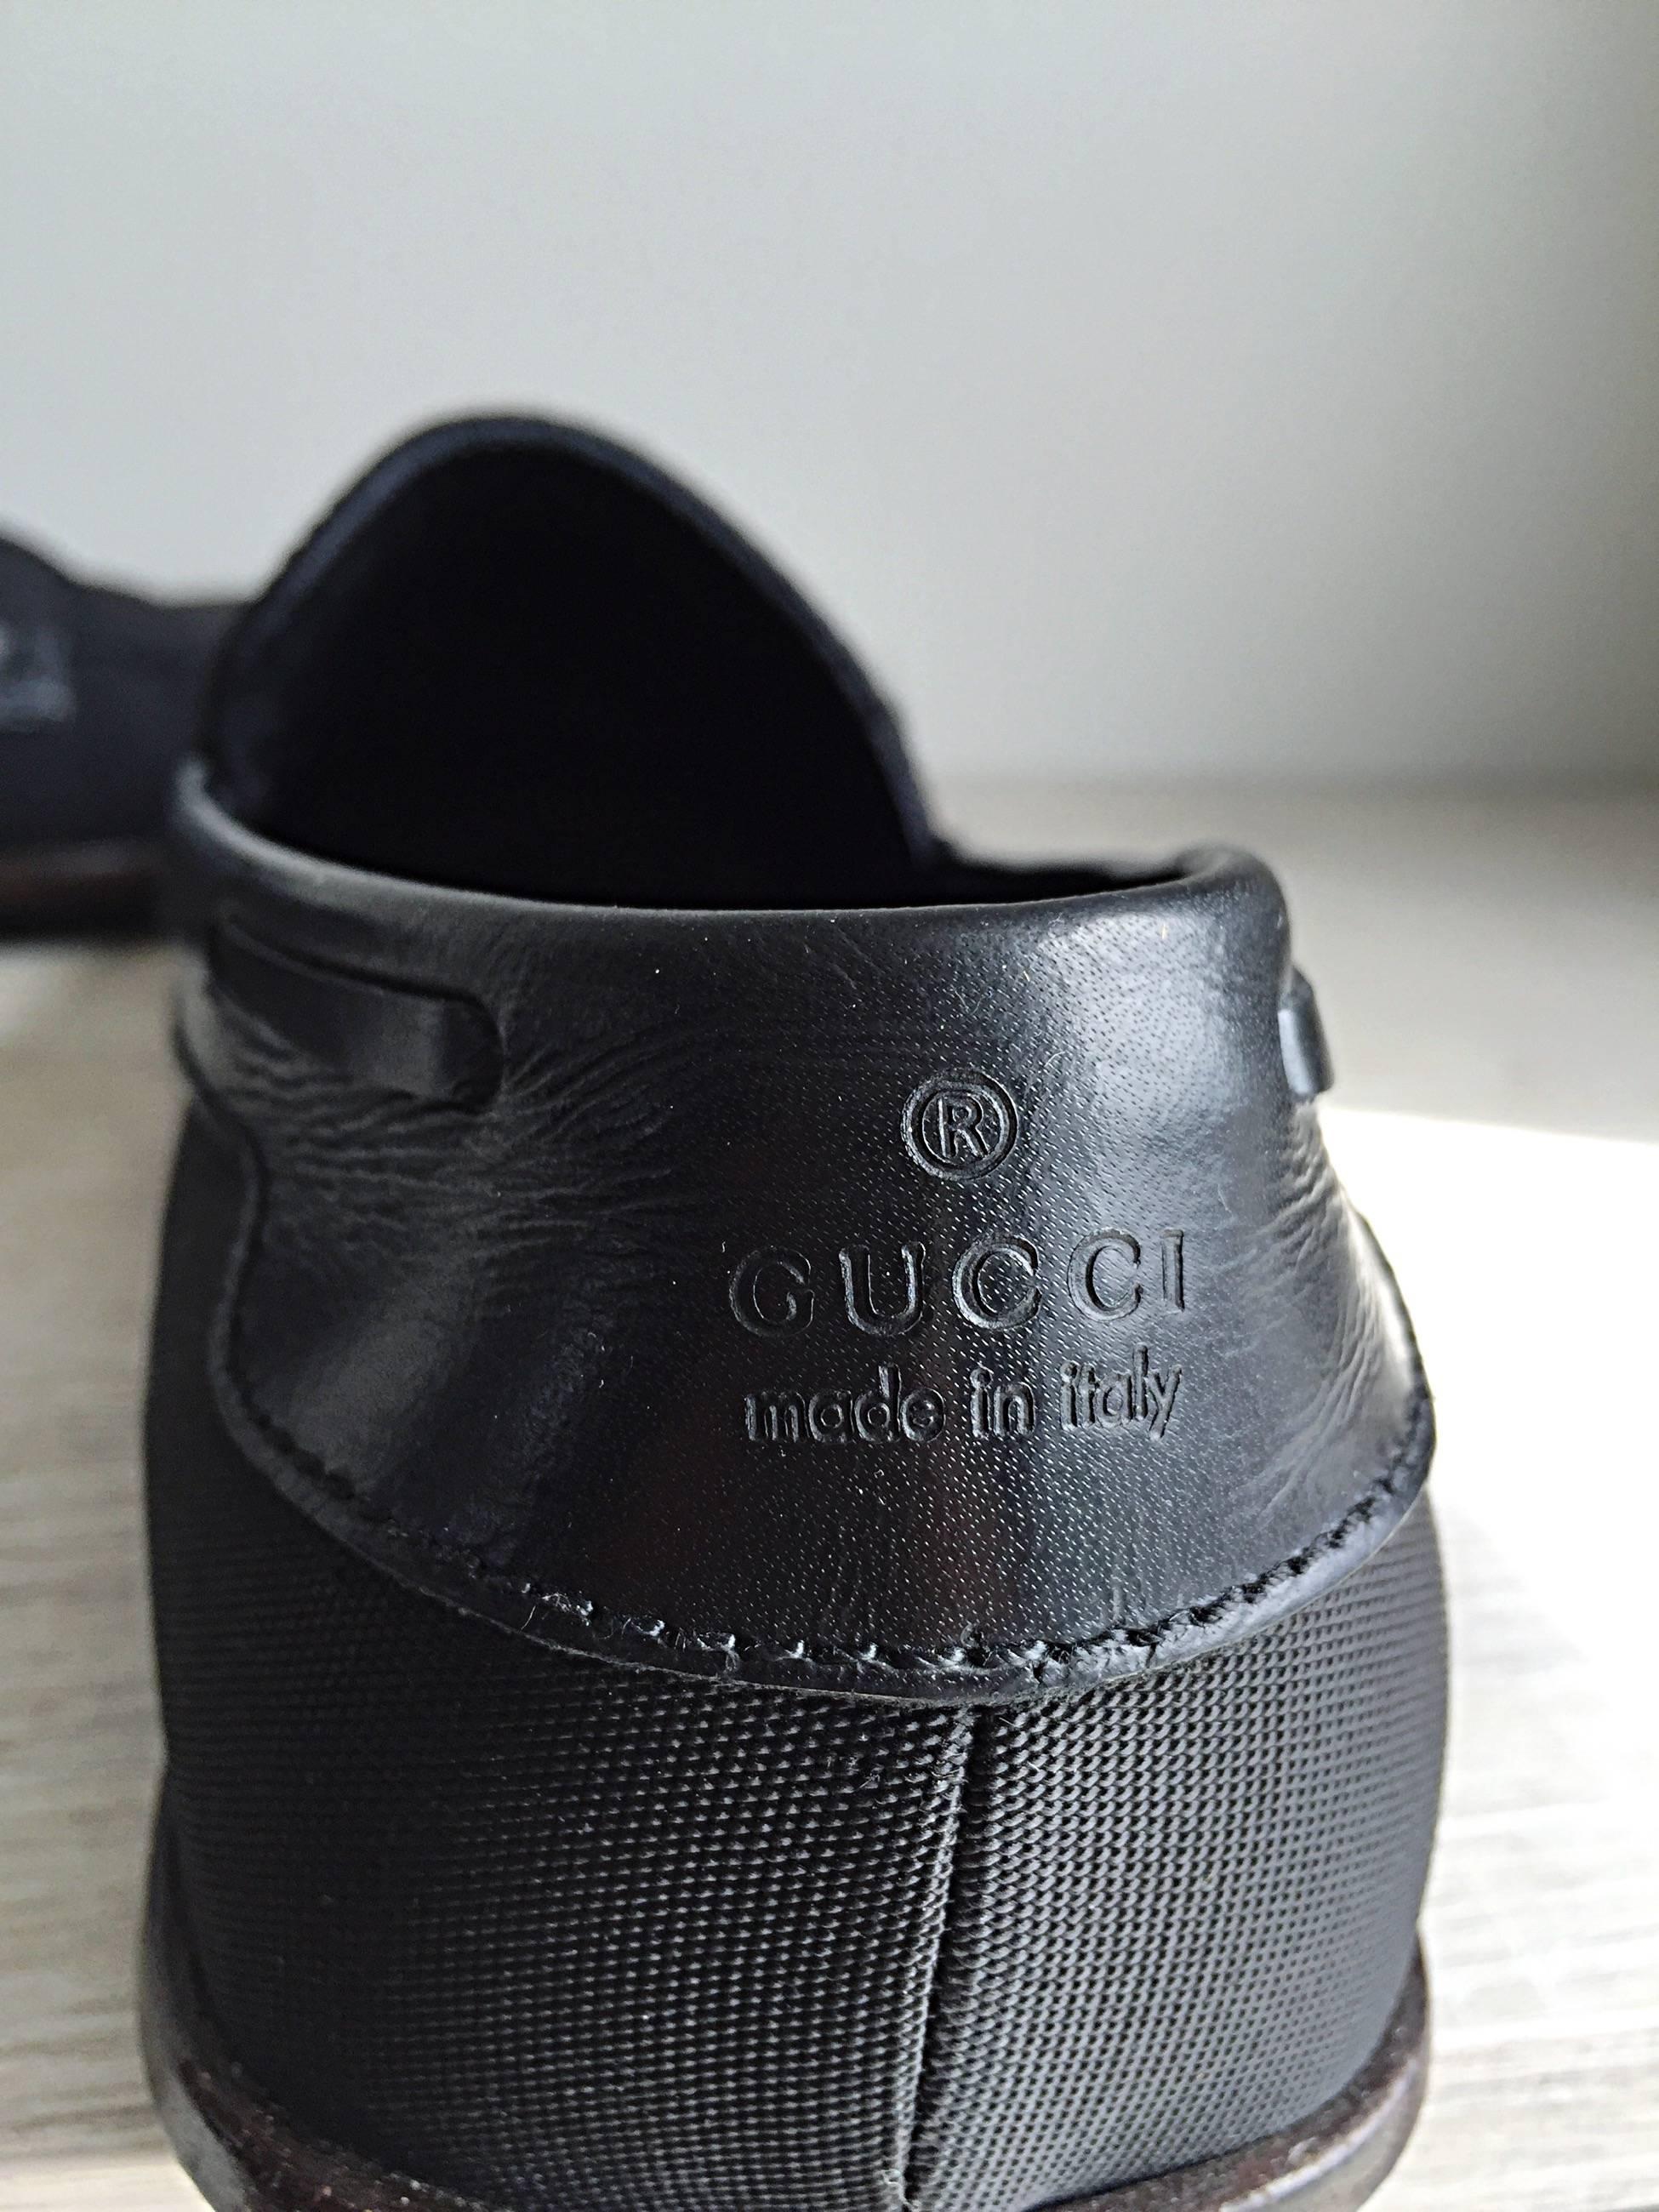 Men's GUCCI by TOM FORD black nylon slide on loafers. Can easily be dressed up or down. From one of the first collections Ford designed at Gucci. Made in Italy
Marked Size US 8 (runs true to size)